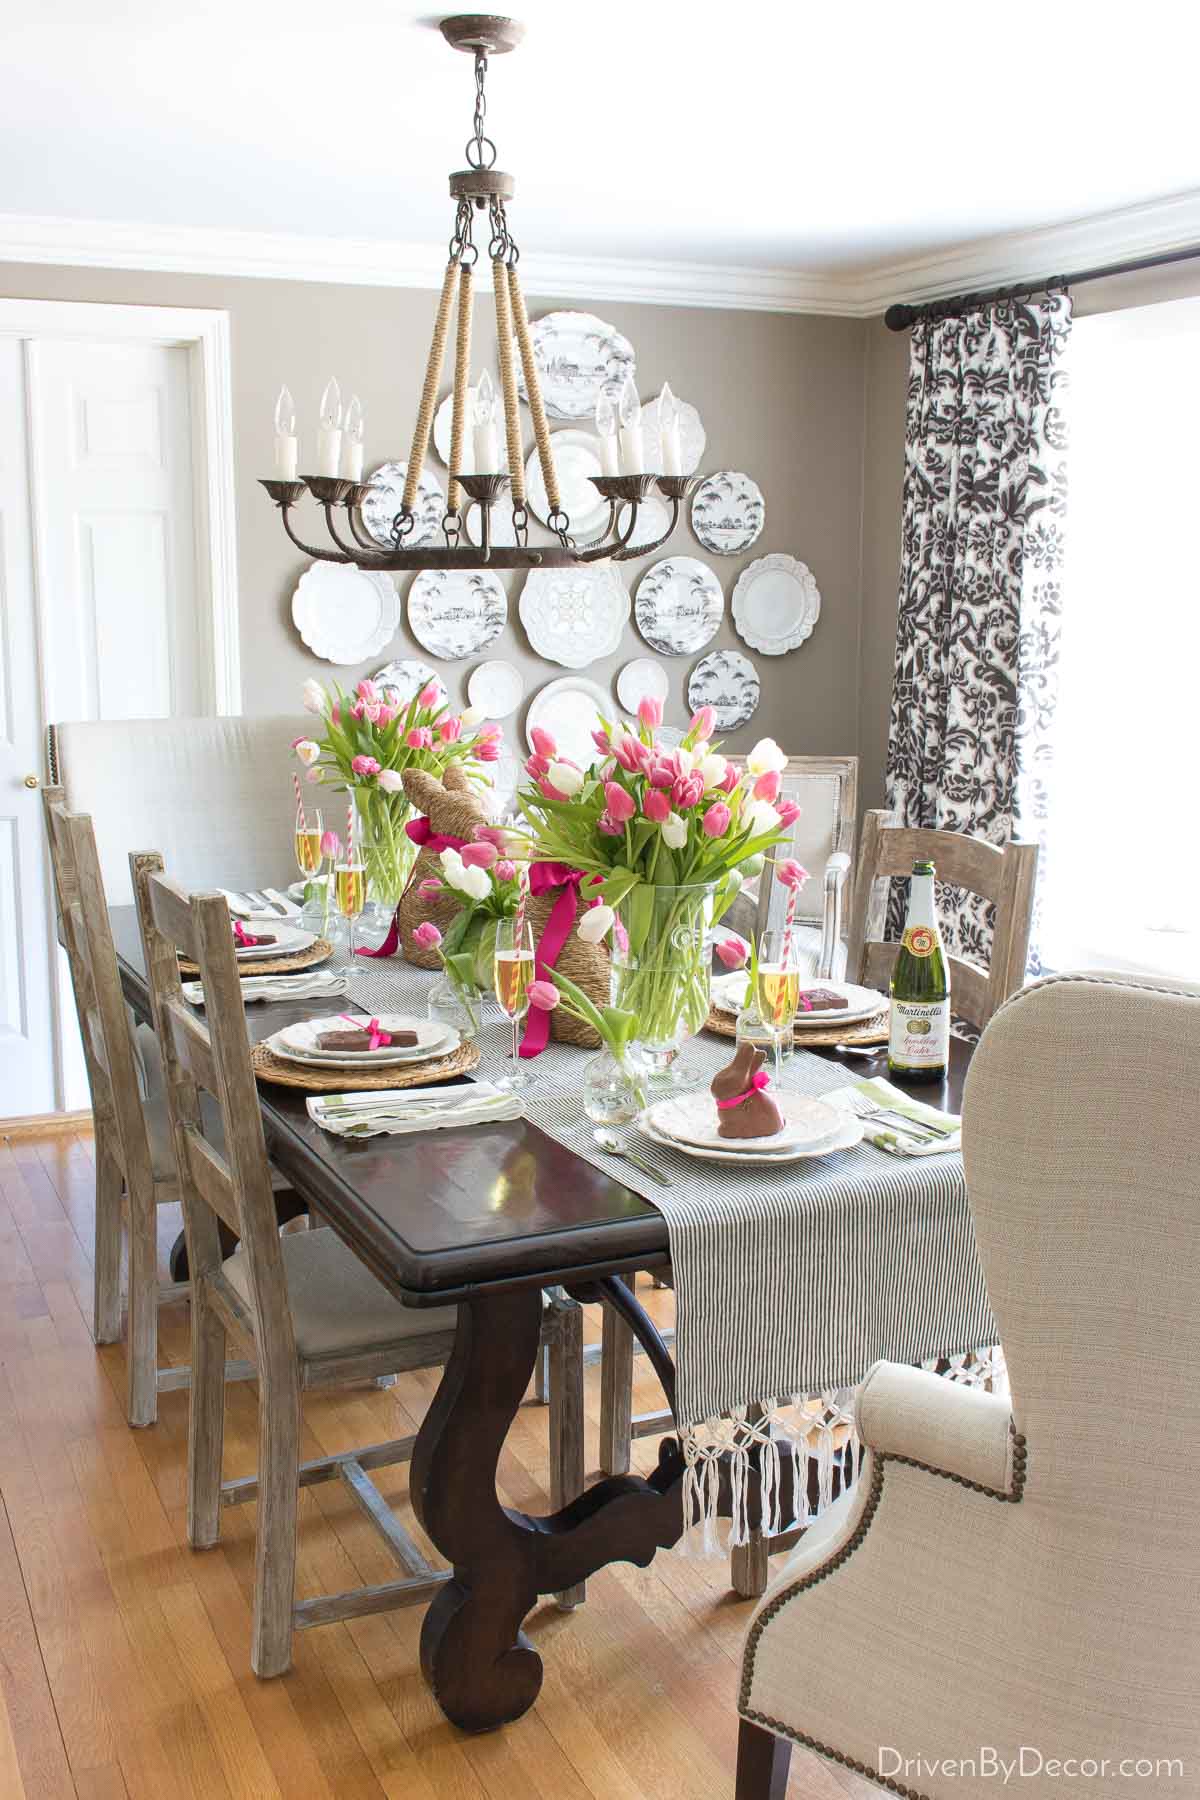 Easter table with vases of tulips and bunny decor